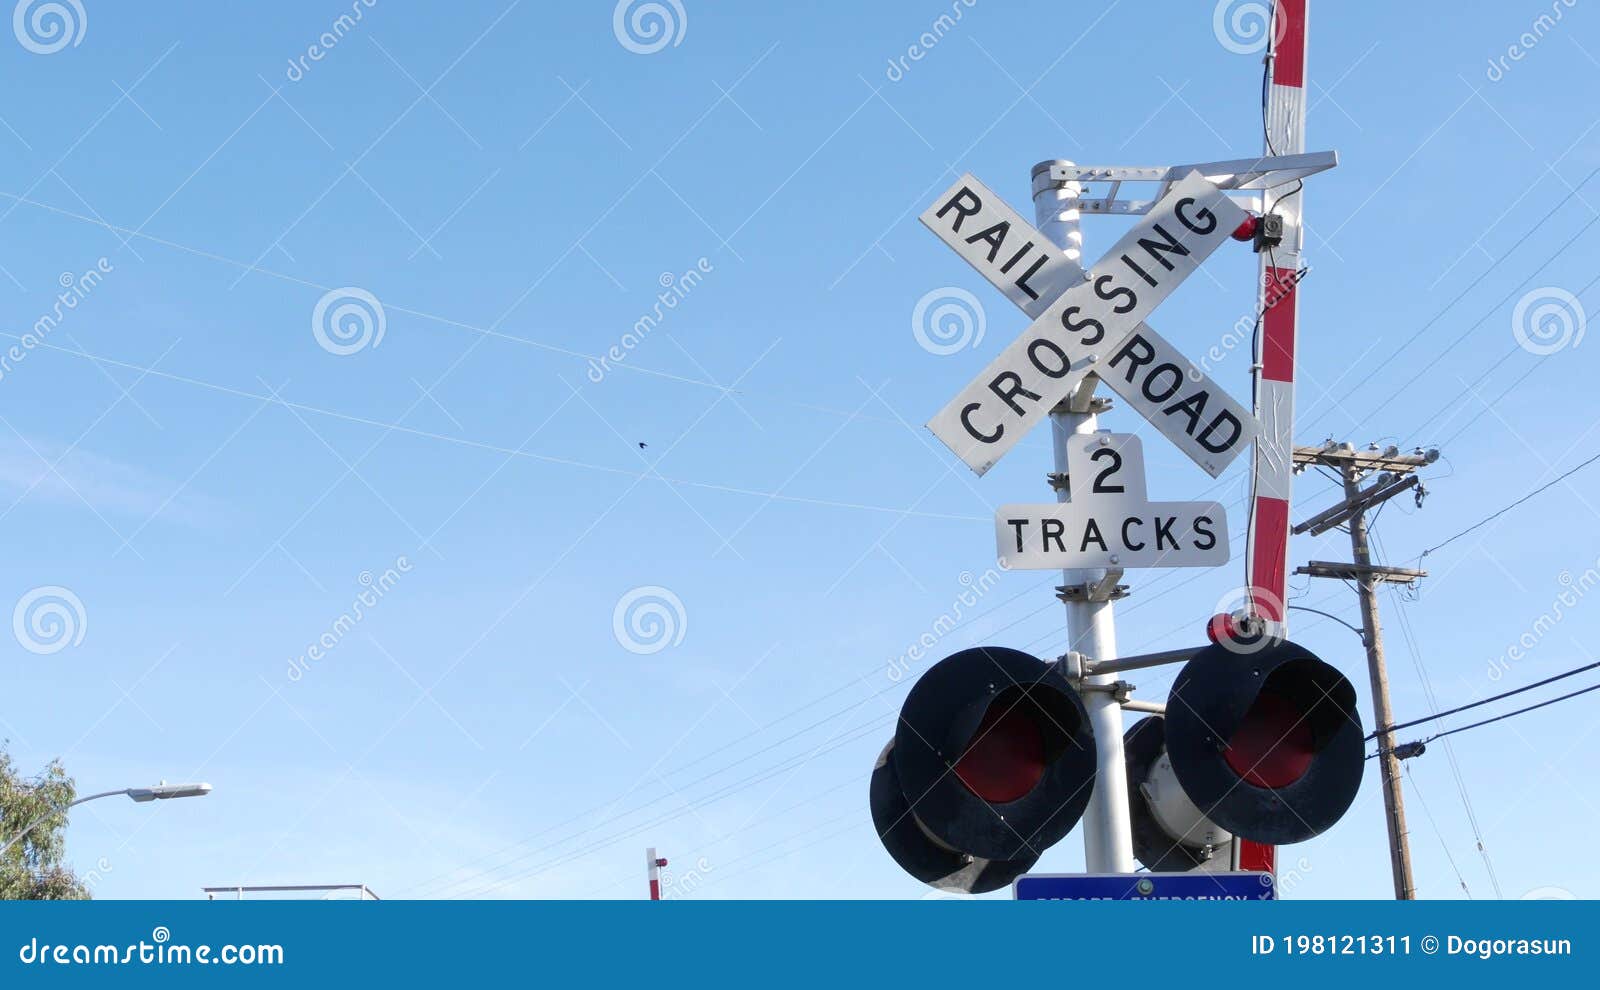 Level Crossing Warning Signal In Usa Crossbuck Notice And Red Traffic Light On Rail Road Intersection In California Railway Stock Illustration Illustration Of Blinking Notification